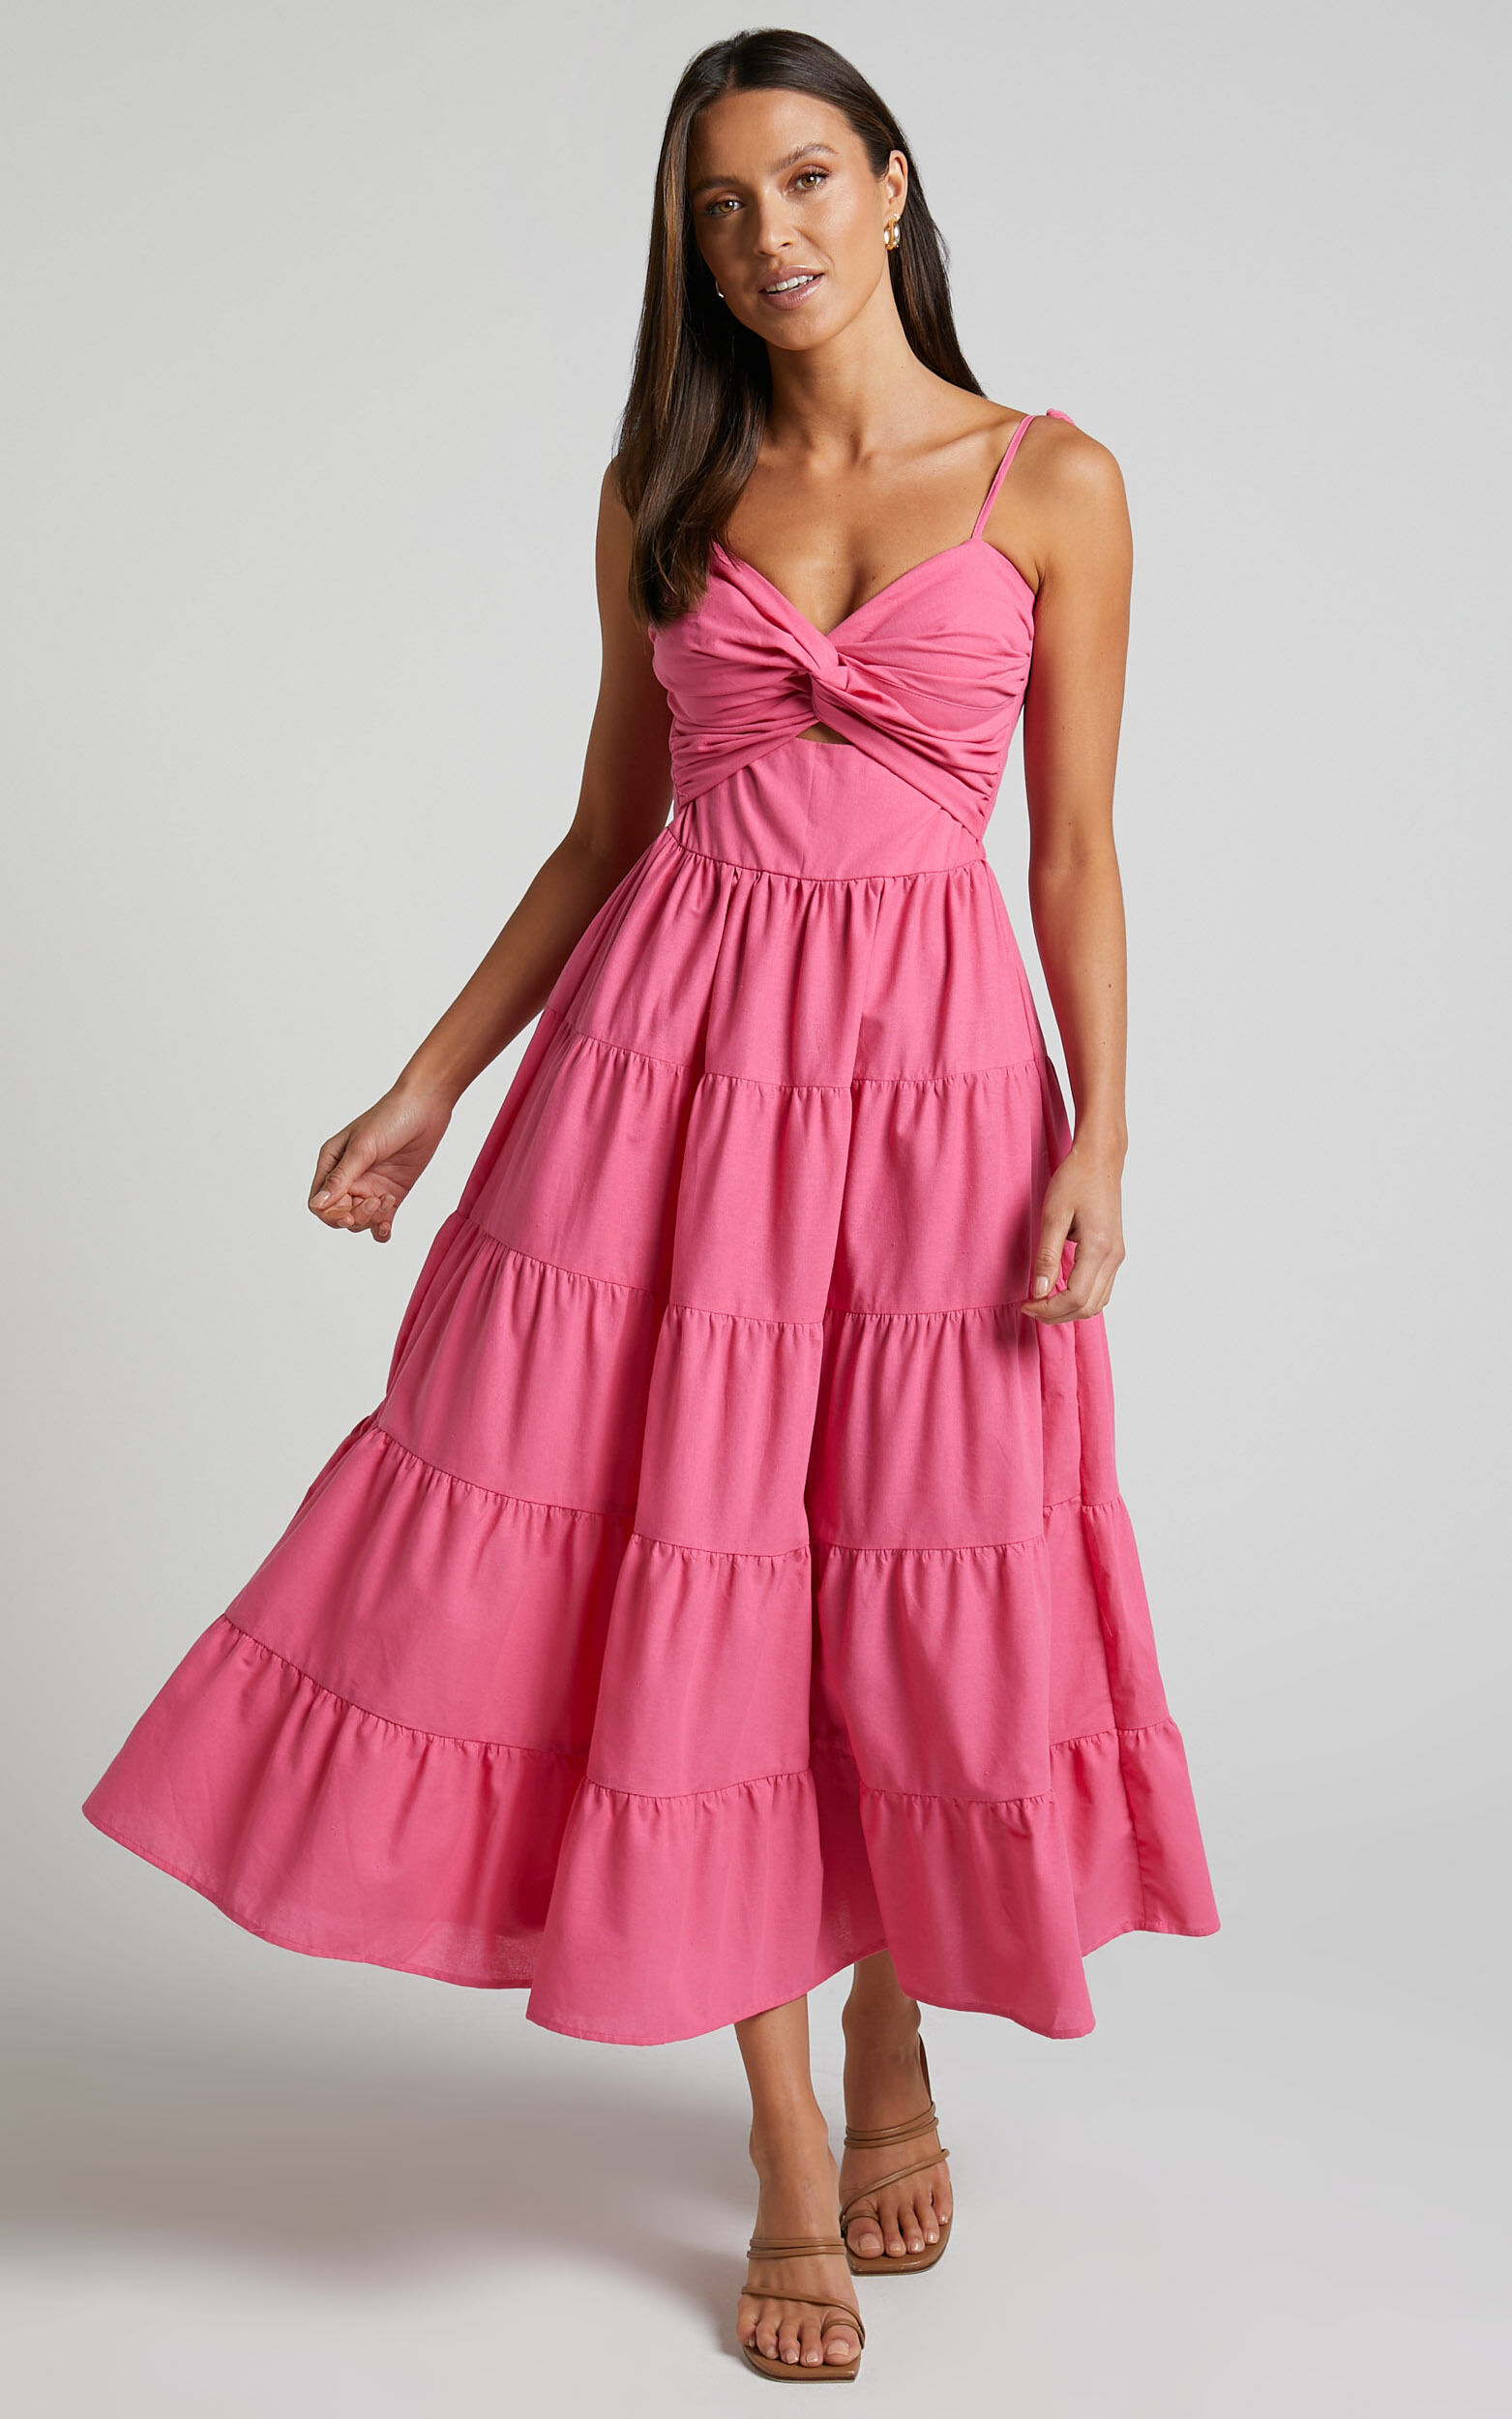 Leticia Maxi Dress - Twist Front Tie Strap Tiered Dress in Hot Pink - 06, PNK1